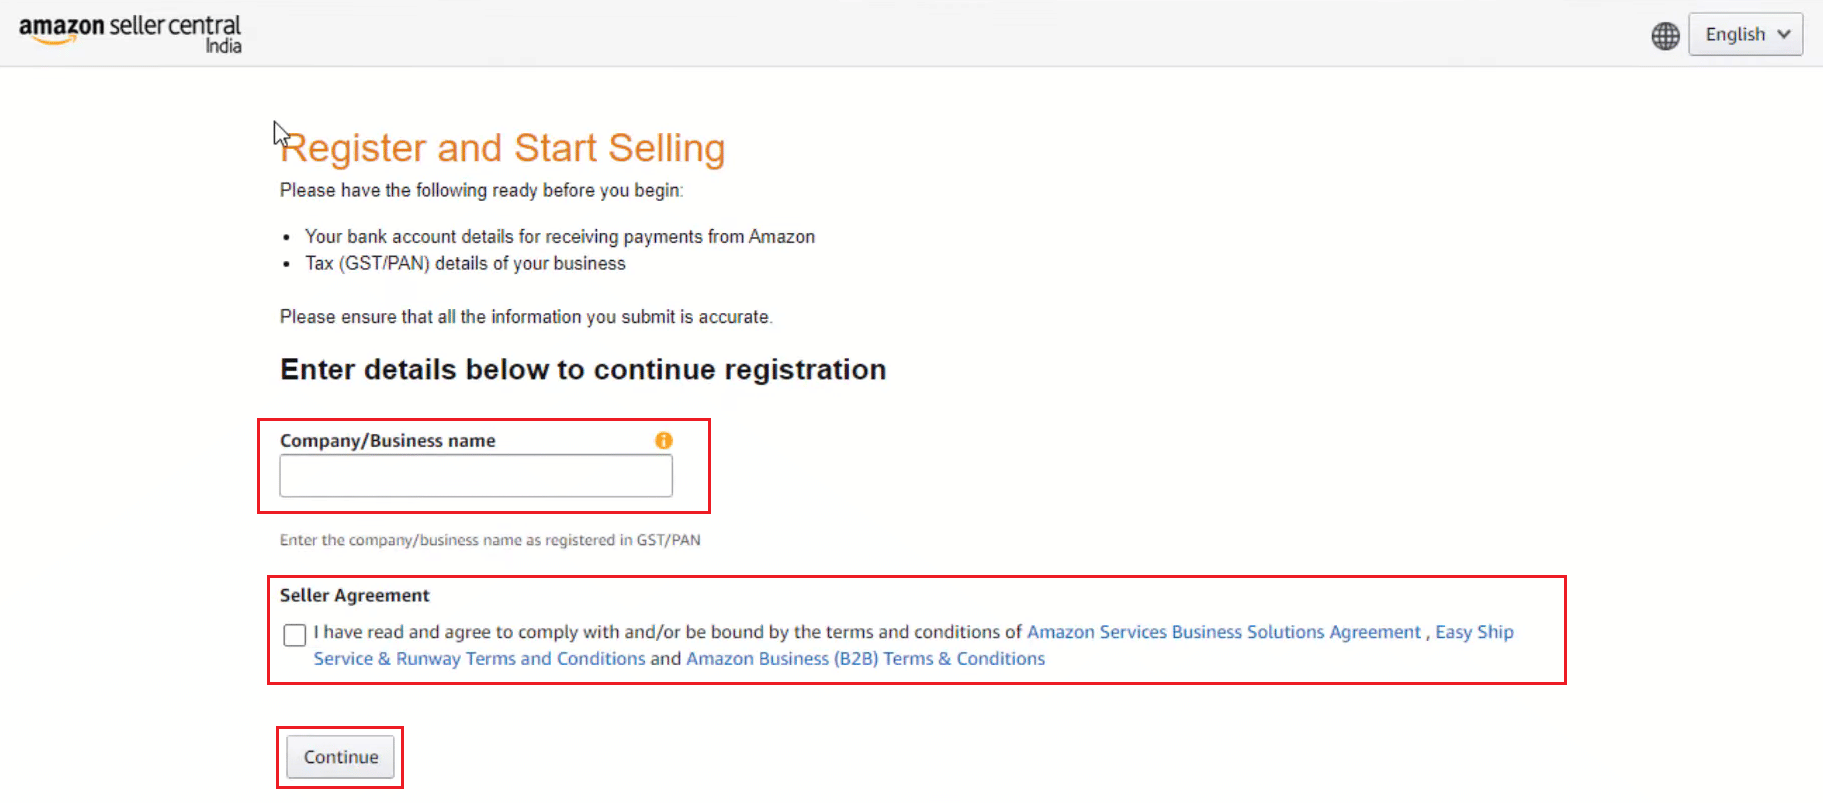 enter your Company or Business name and mark the Seller Agreement checkbox. Then, click on Continue